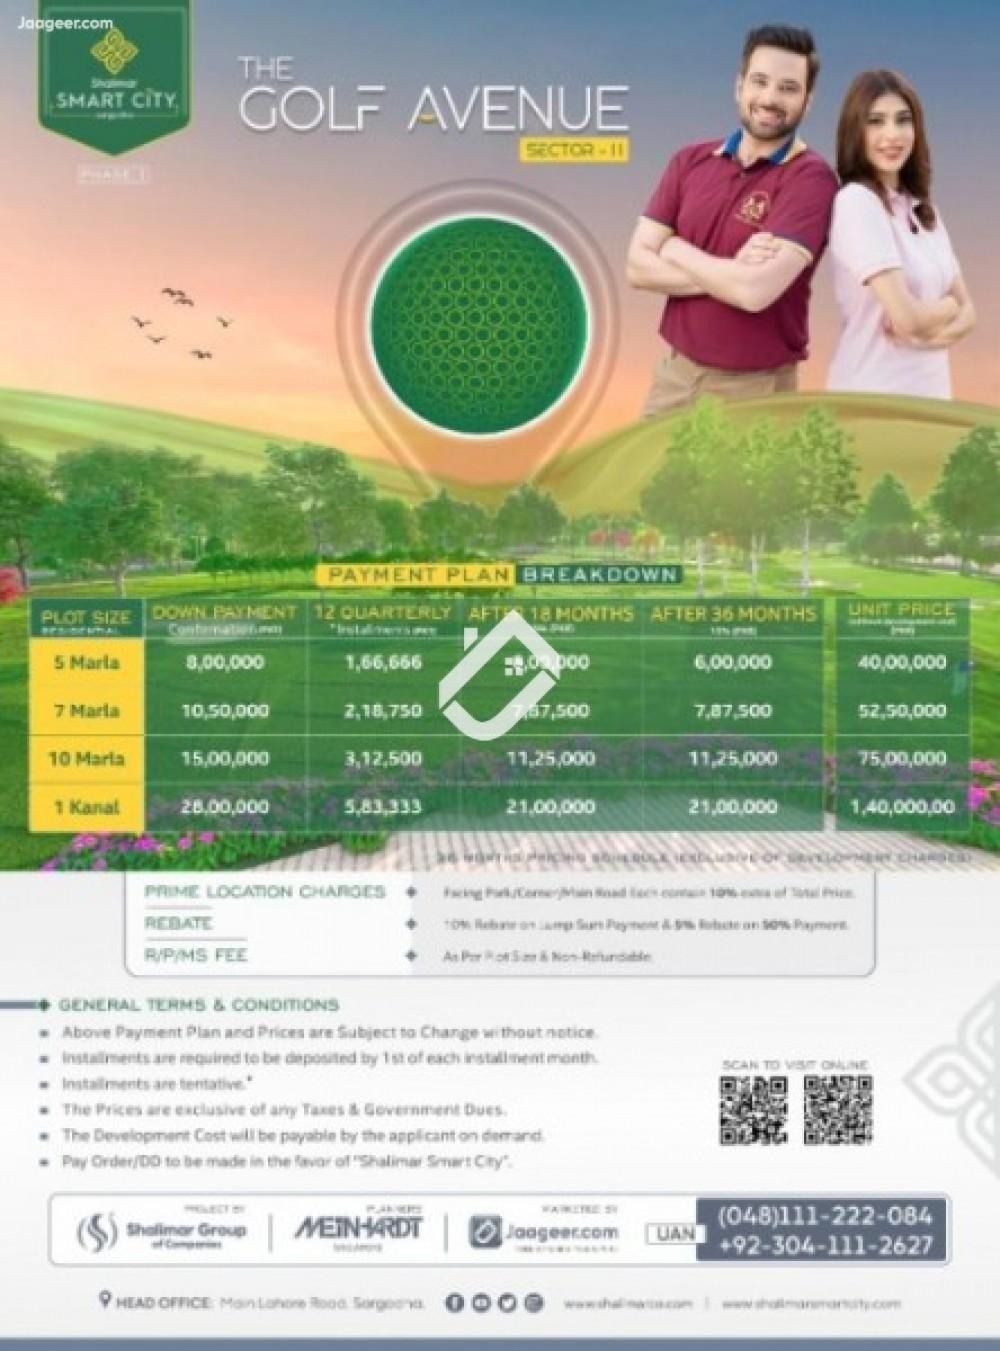 Main image 7 Marla Residential Plot For Sale In Shalimar Smart City Sector-II In Shalimar Smart City Phase -1 The Golf Avenue Sector-II